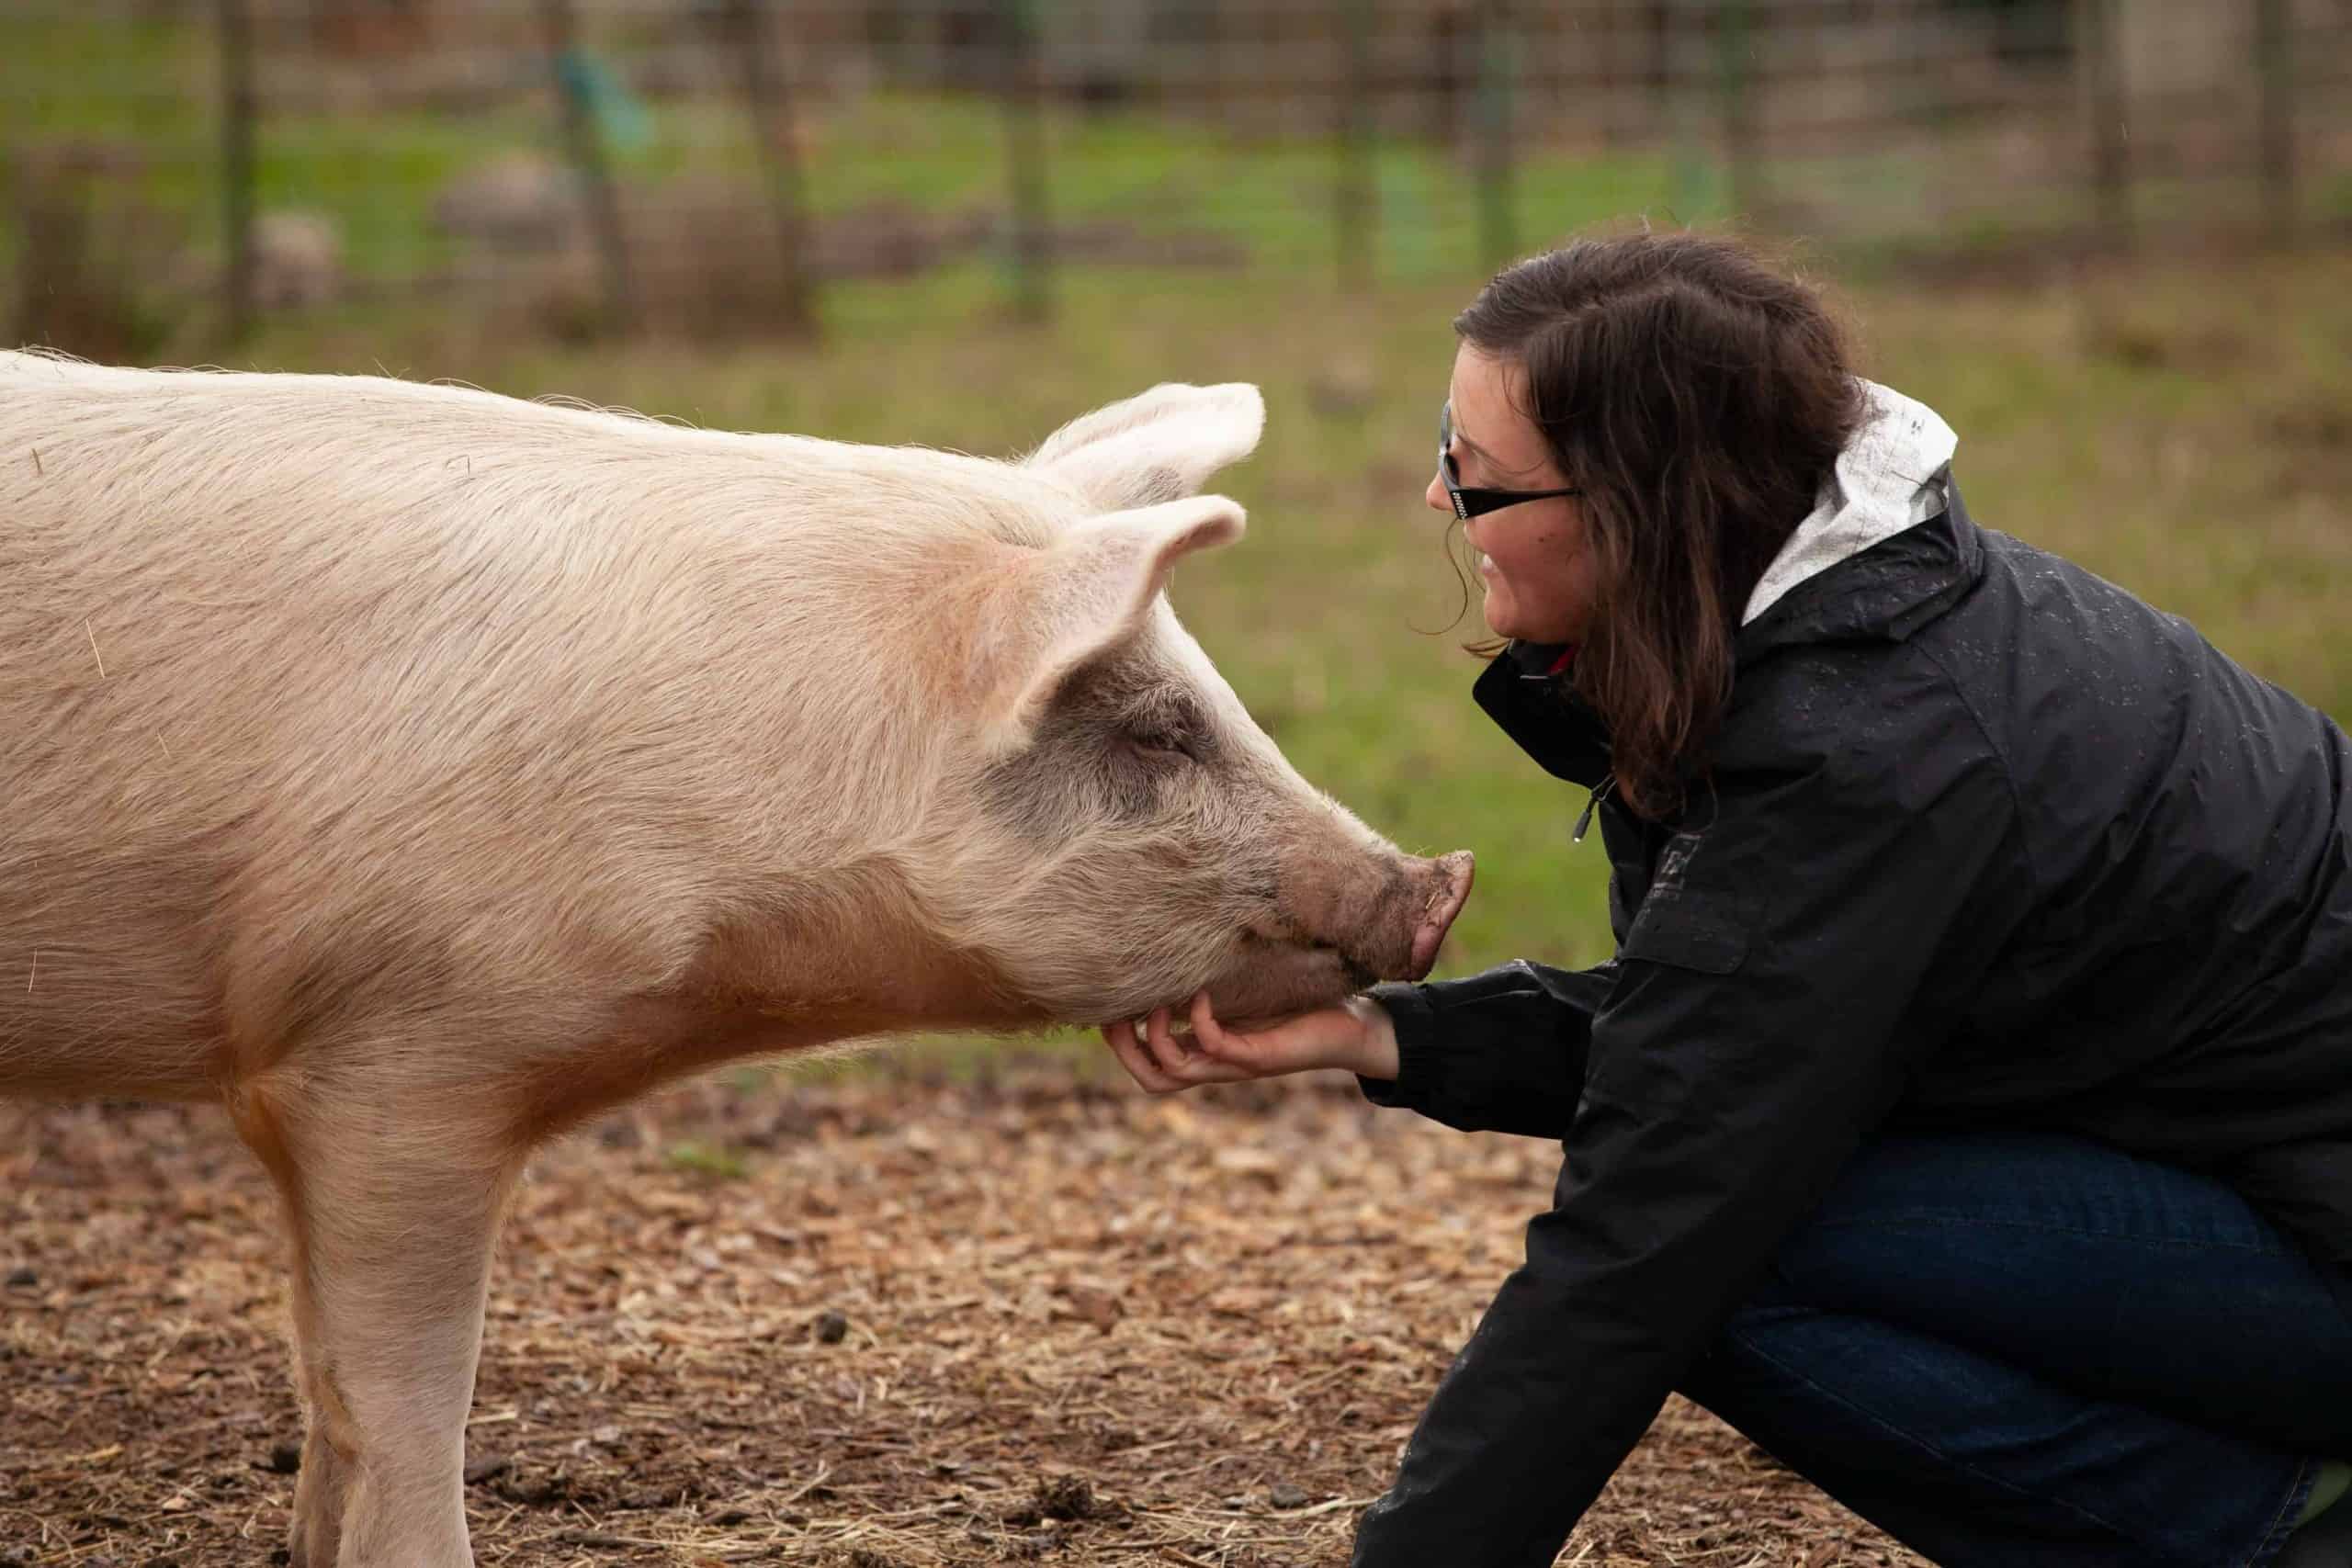 Care Staff Retention At Your Animal Sanctuary - The Open Sanctuary Project